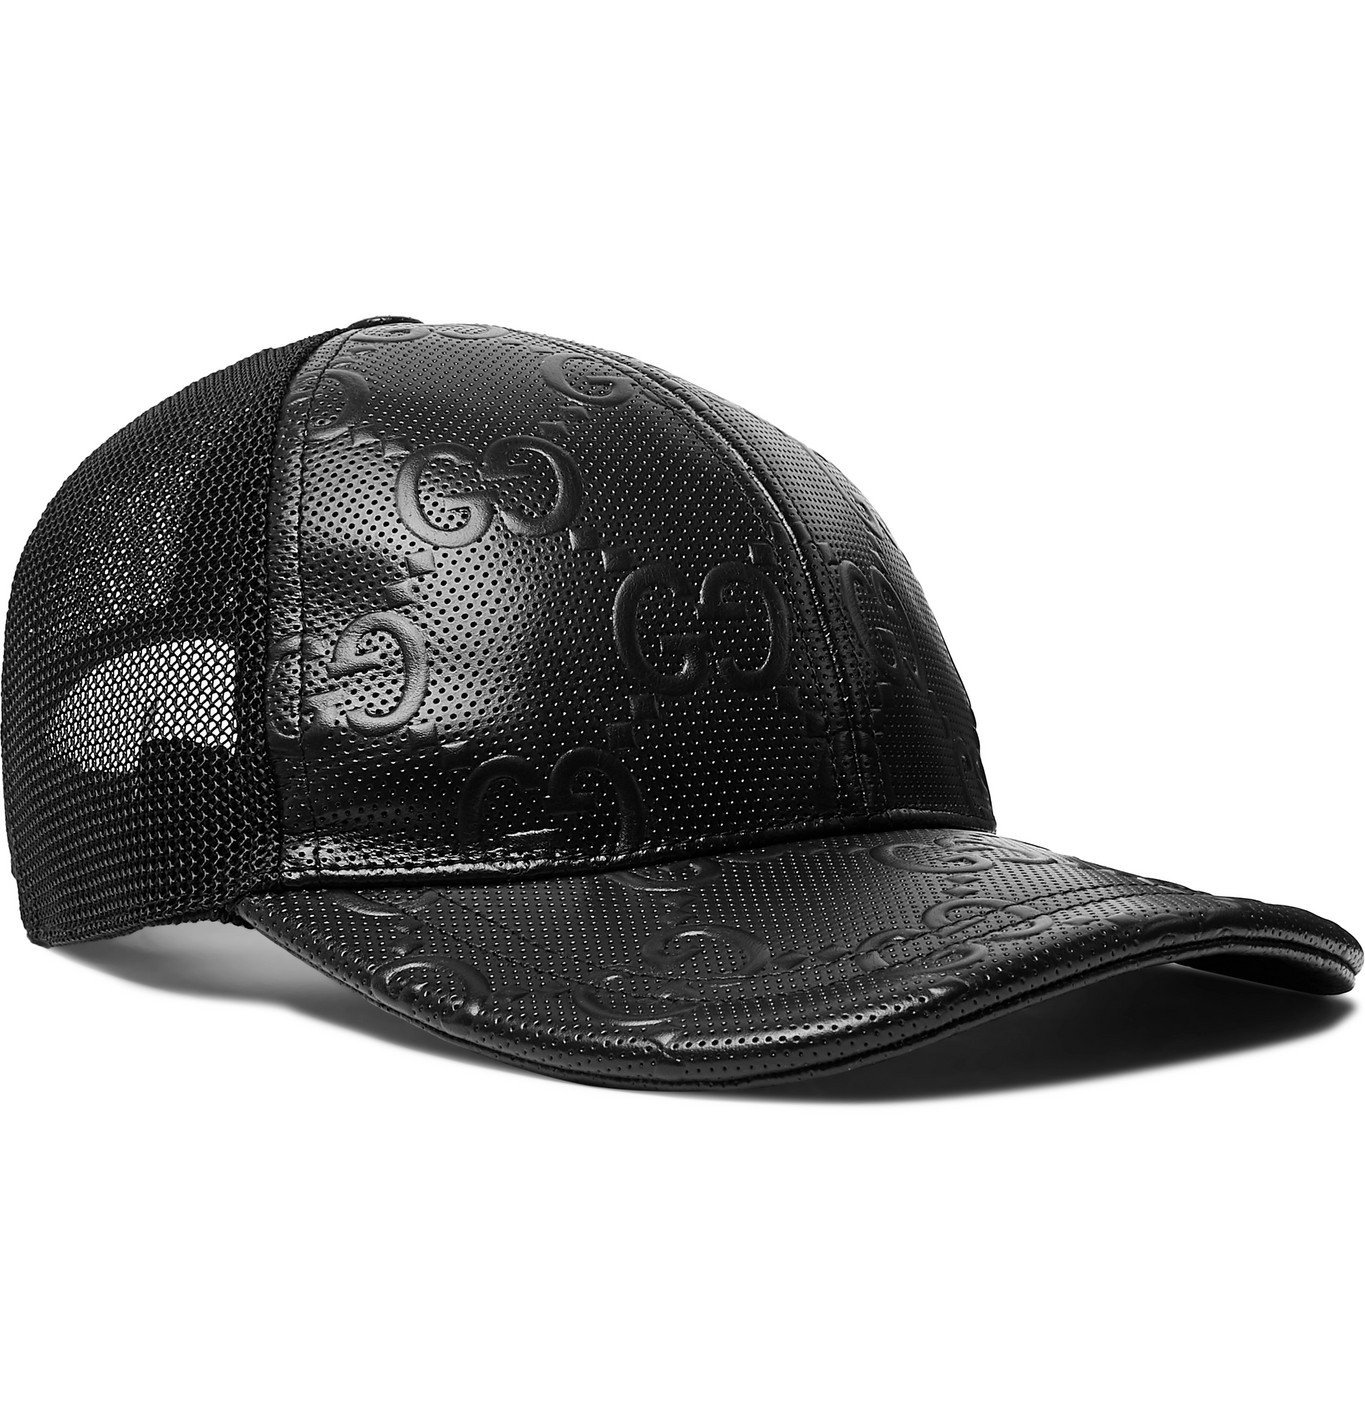 Gucci - Logo-Embossed Leather and Mesh Cap - Black Gucci